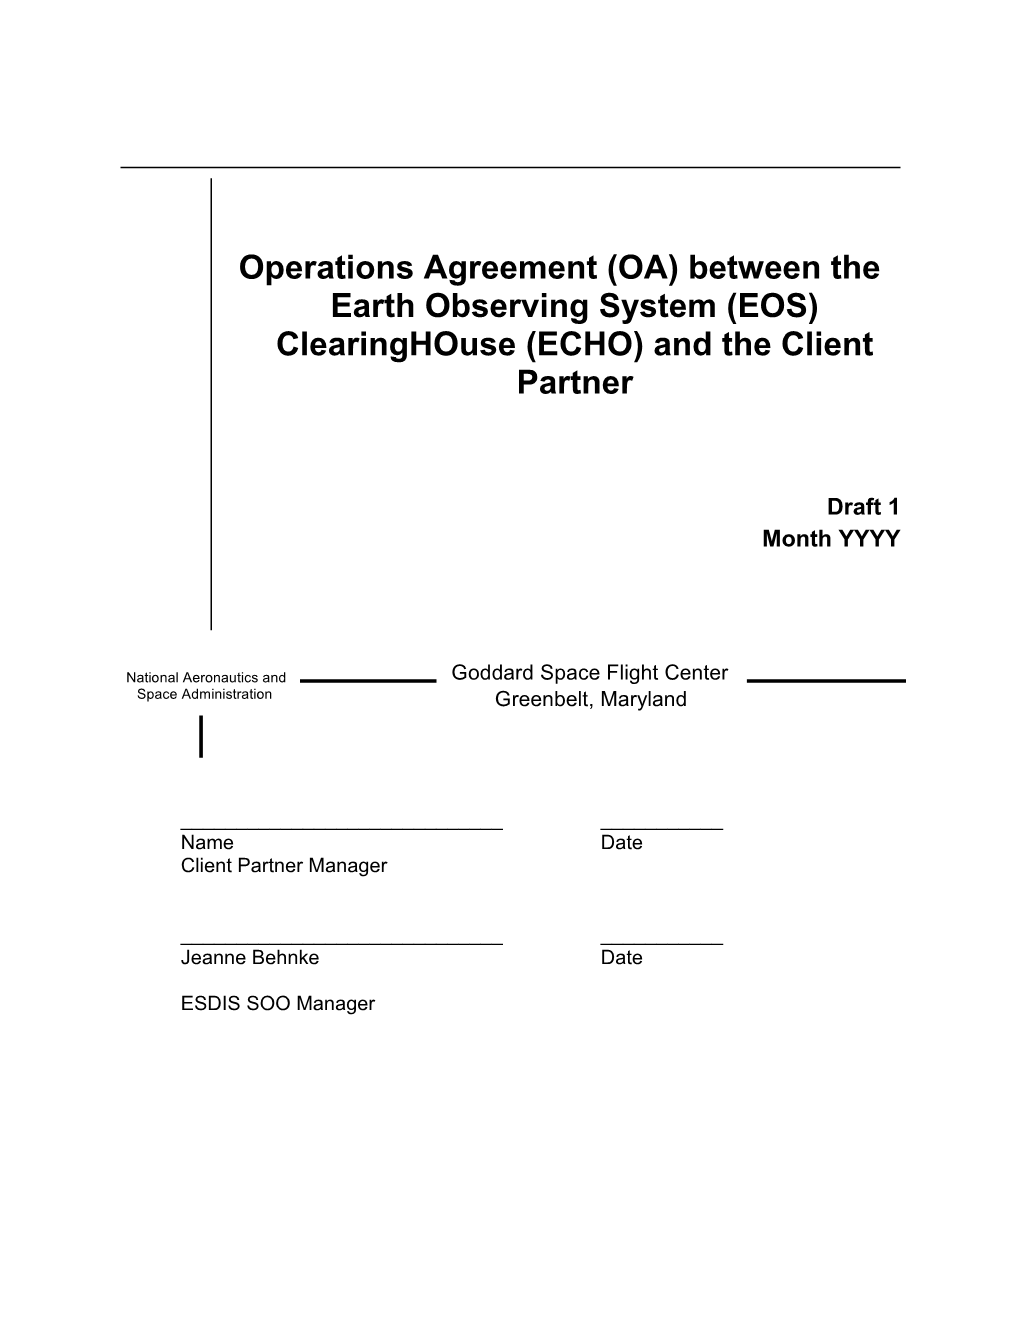 Operations Agreement (OA) Between the Earth Observing System (EOS) Clearinghouse (ECHO)